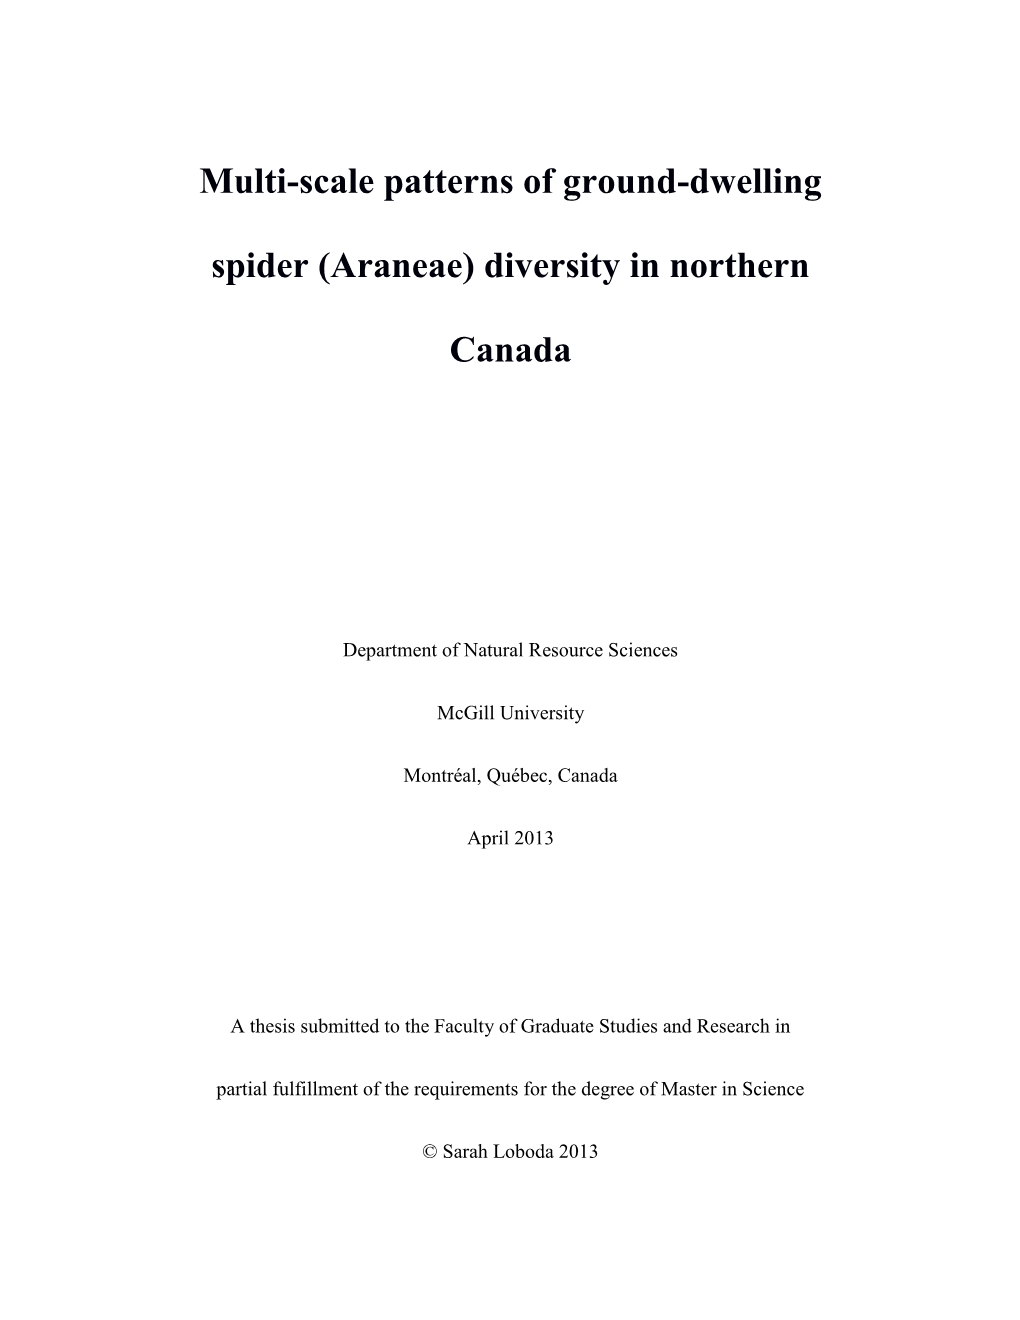 Multi-Scale Patterns of Ground-Dwelling Spider (Araneae) Diversity in Northern Canada